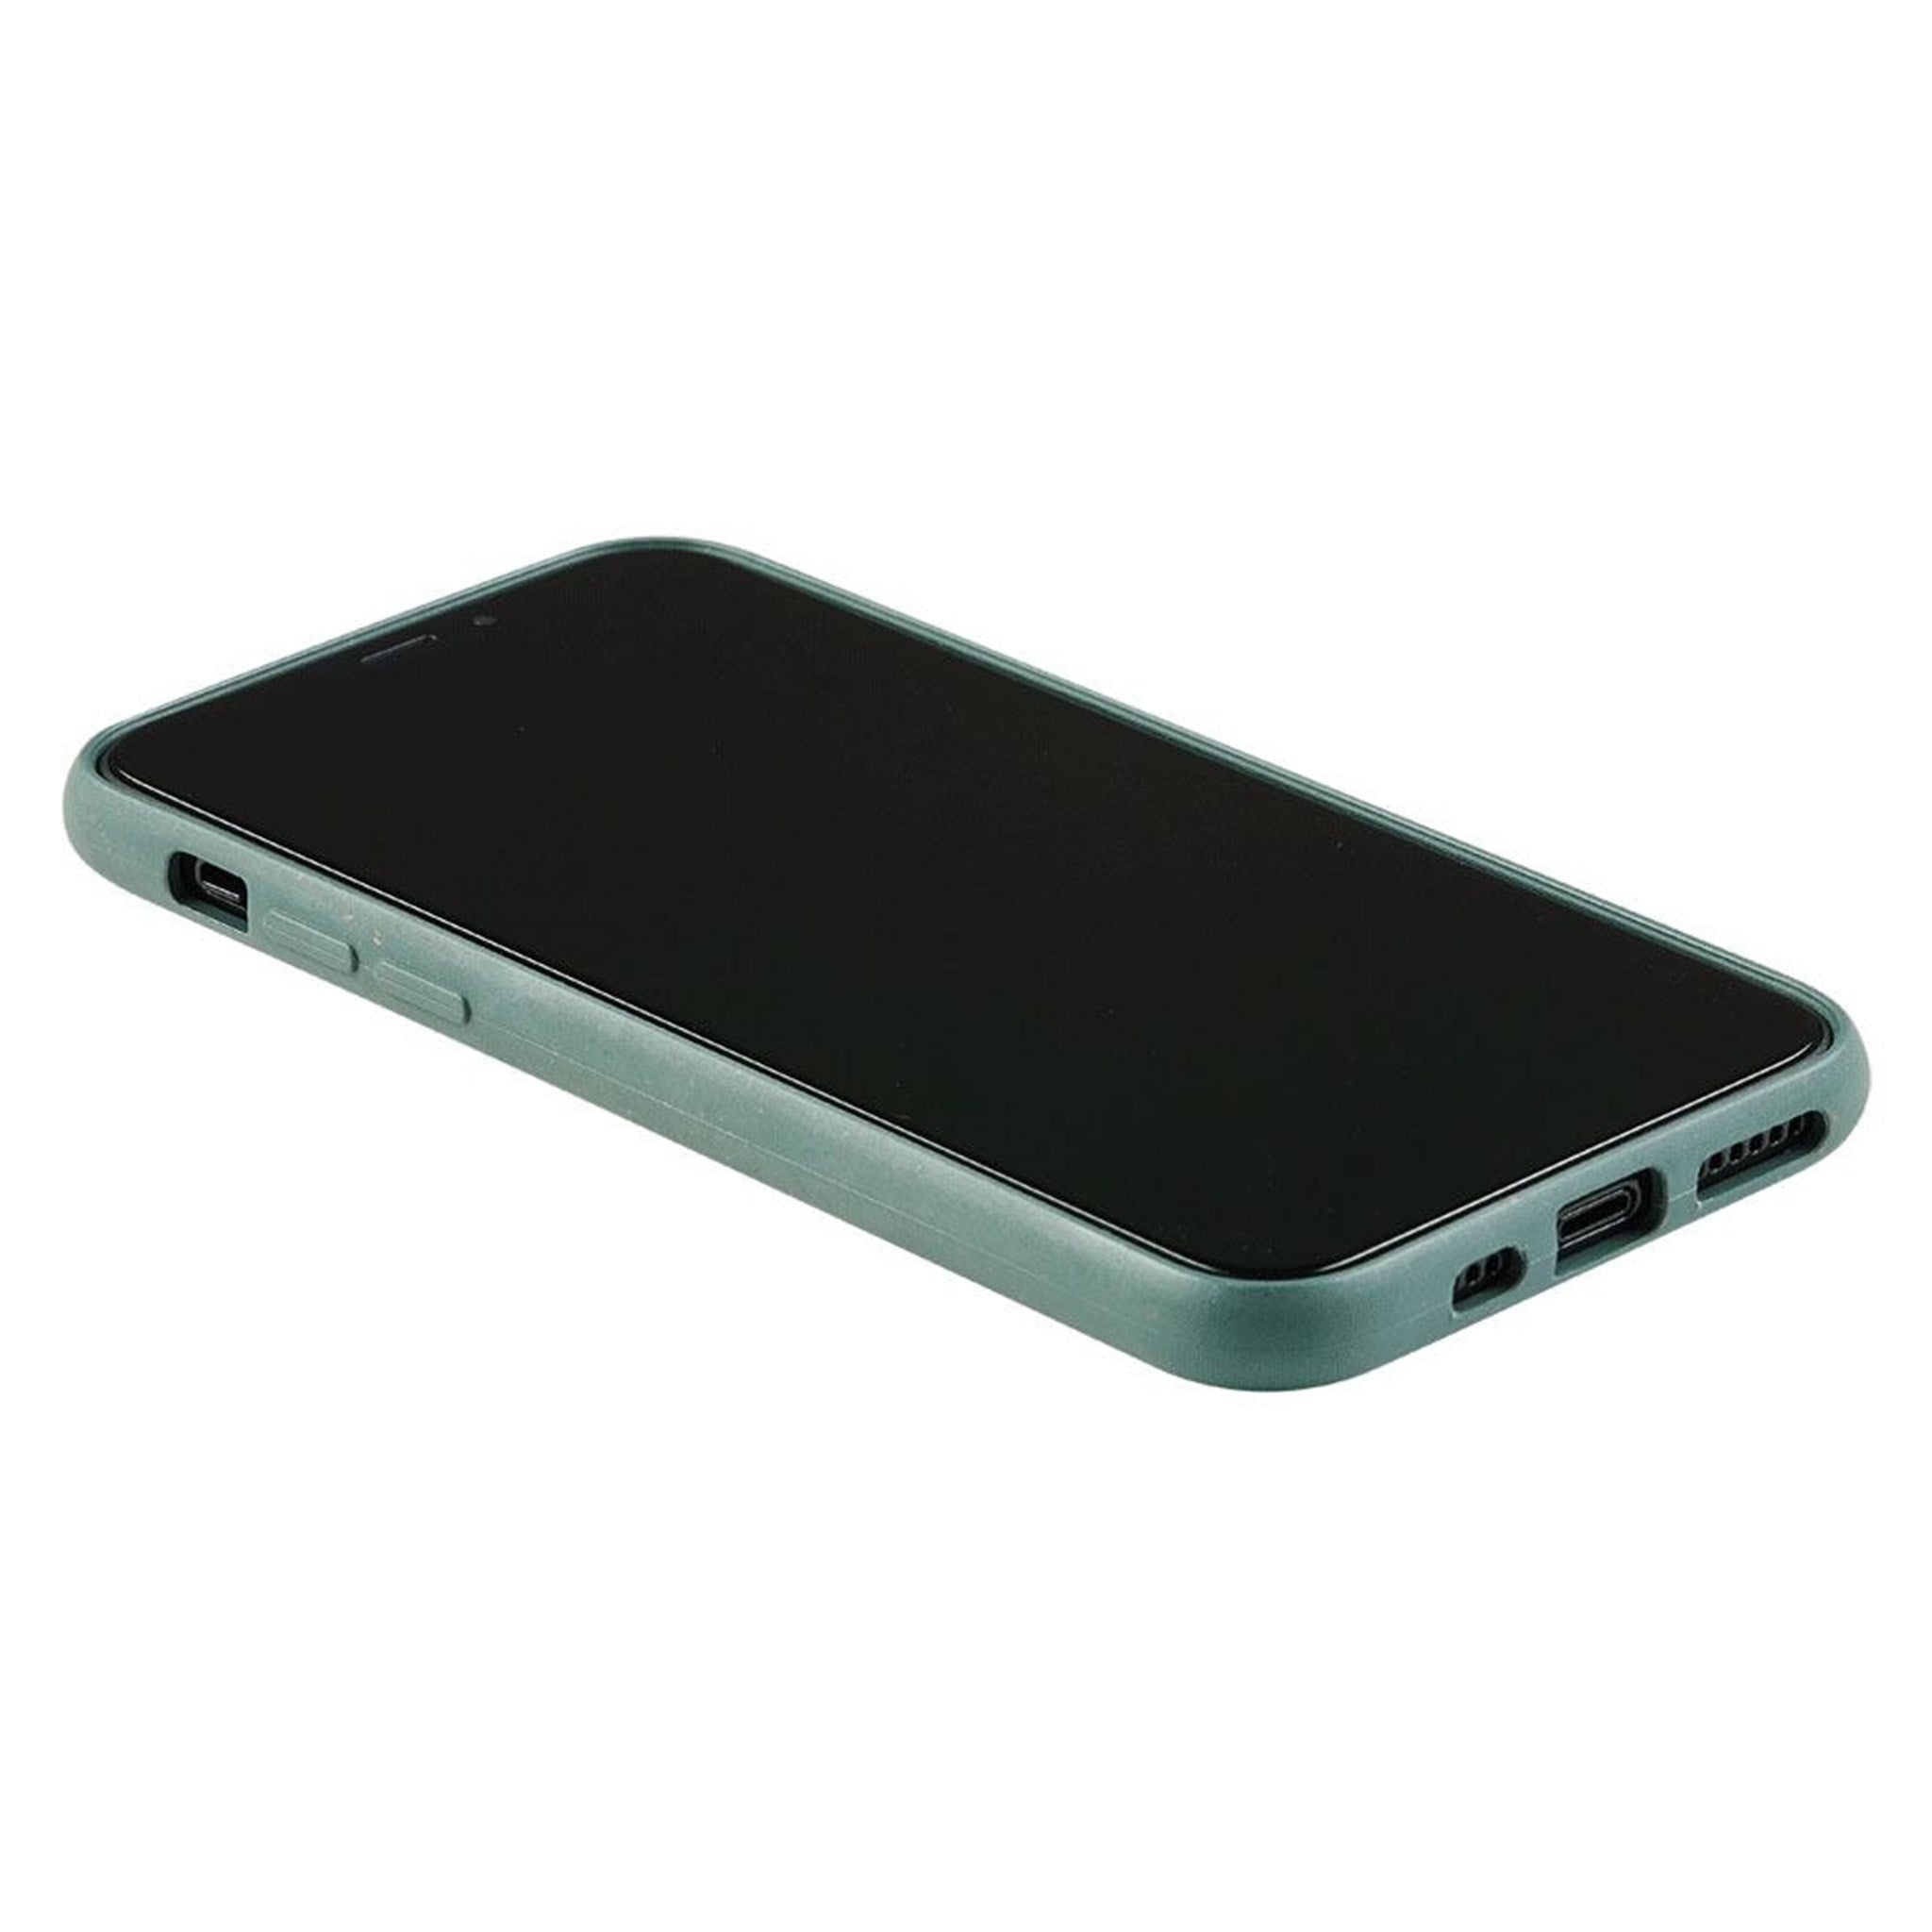 GreyLime-iPhone-11-Pro-Max-biodegradable-cover-Dark-green-COIP11PM4-V3.jpg